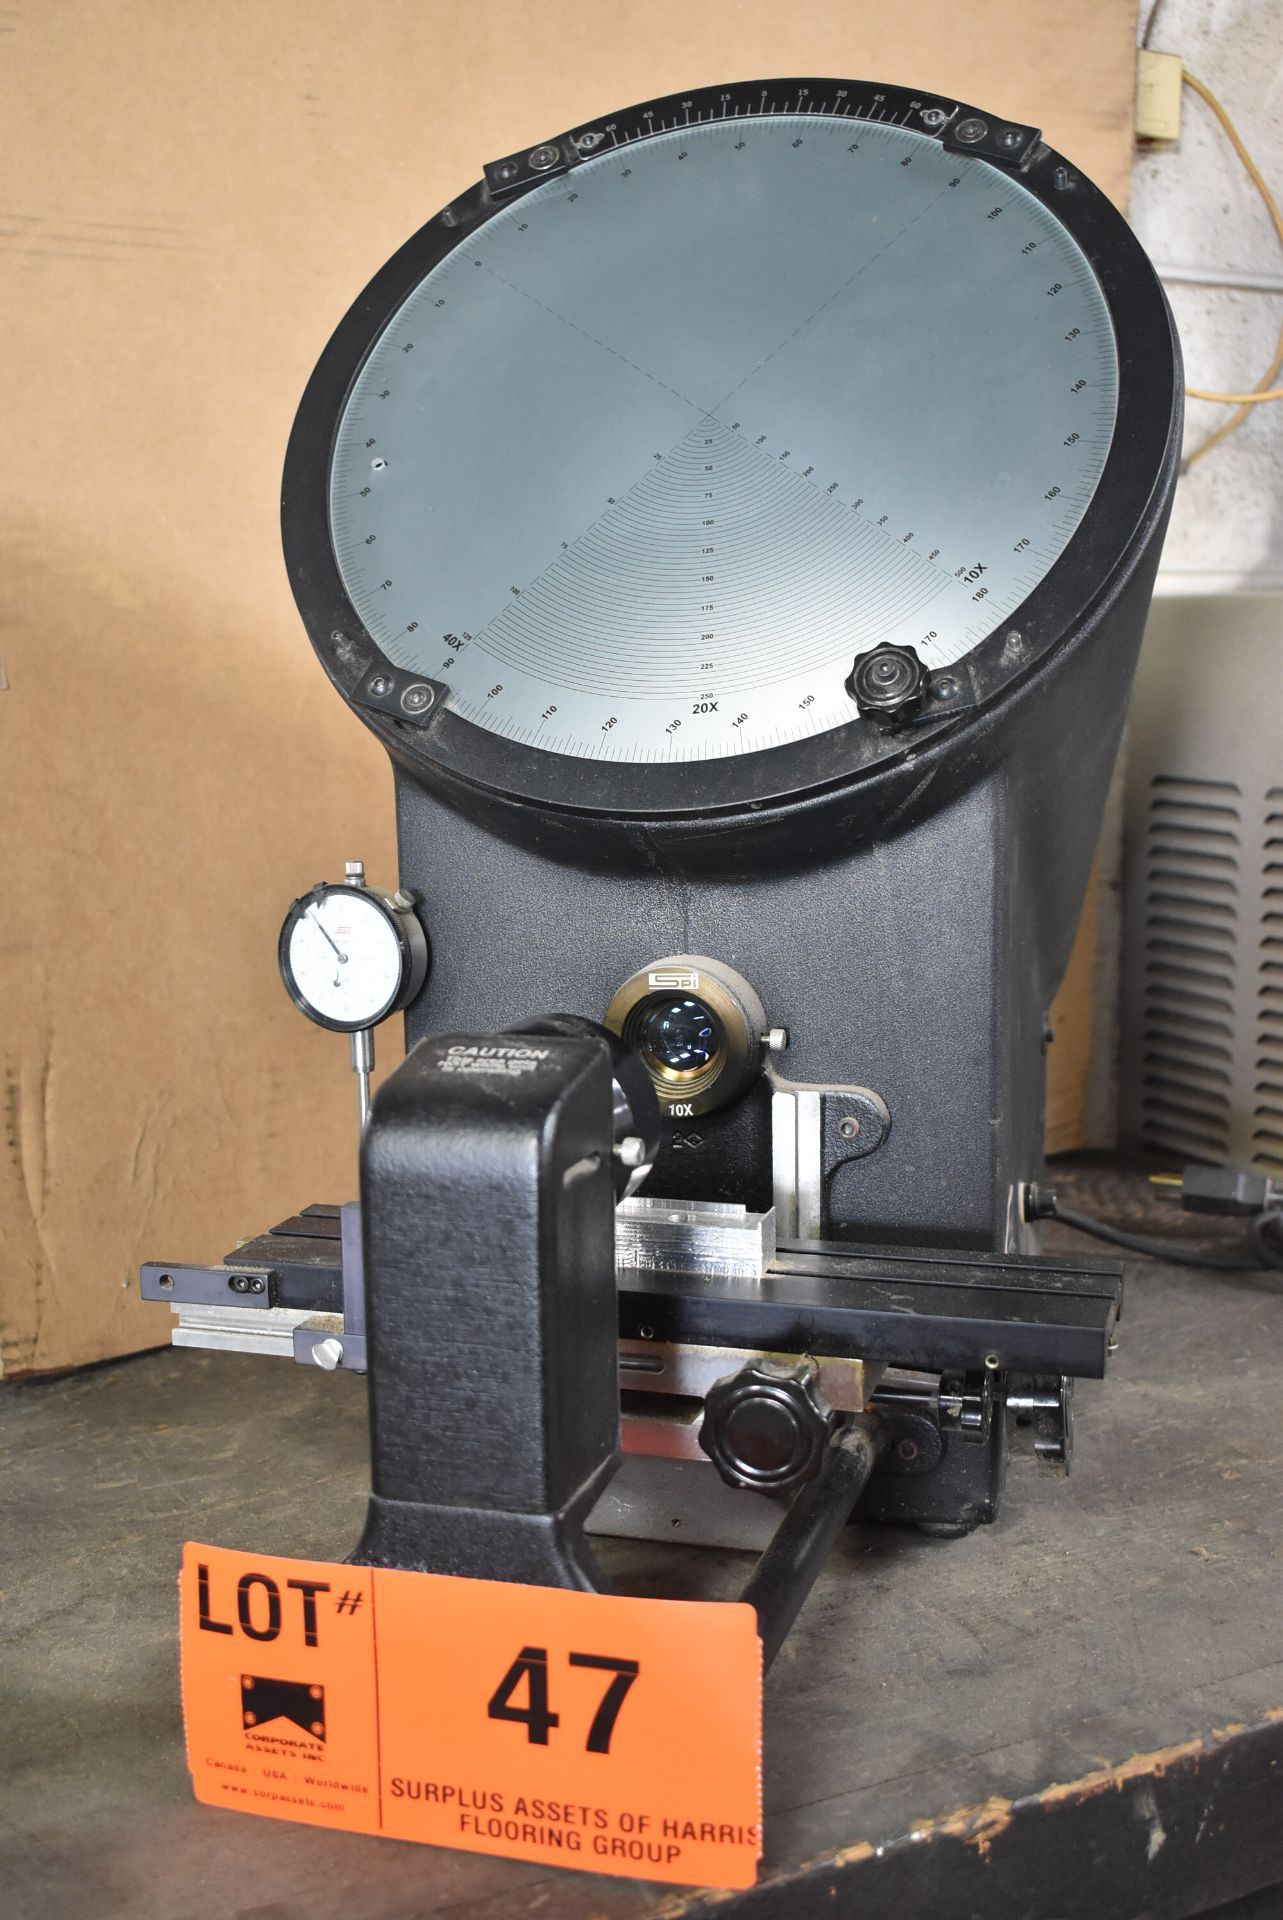 STI 12" BENCHTOP OPTICAL COMPARATOR, S/N: N/A